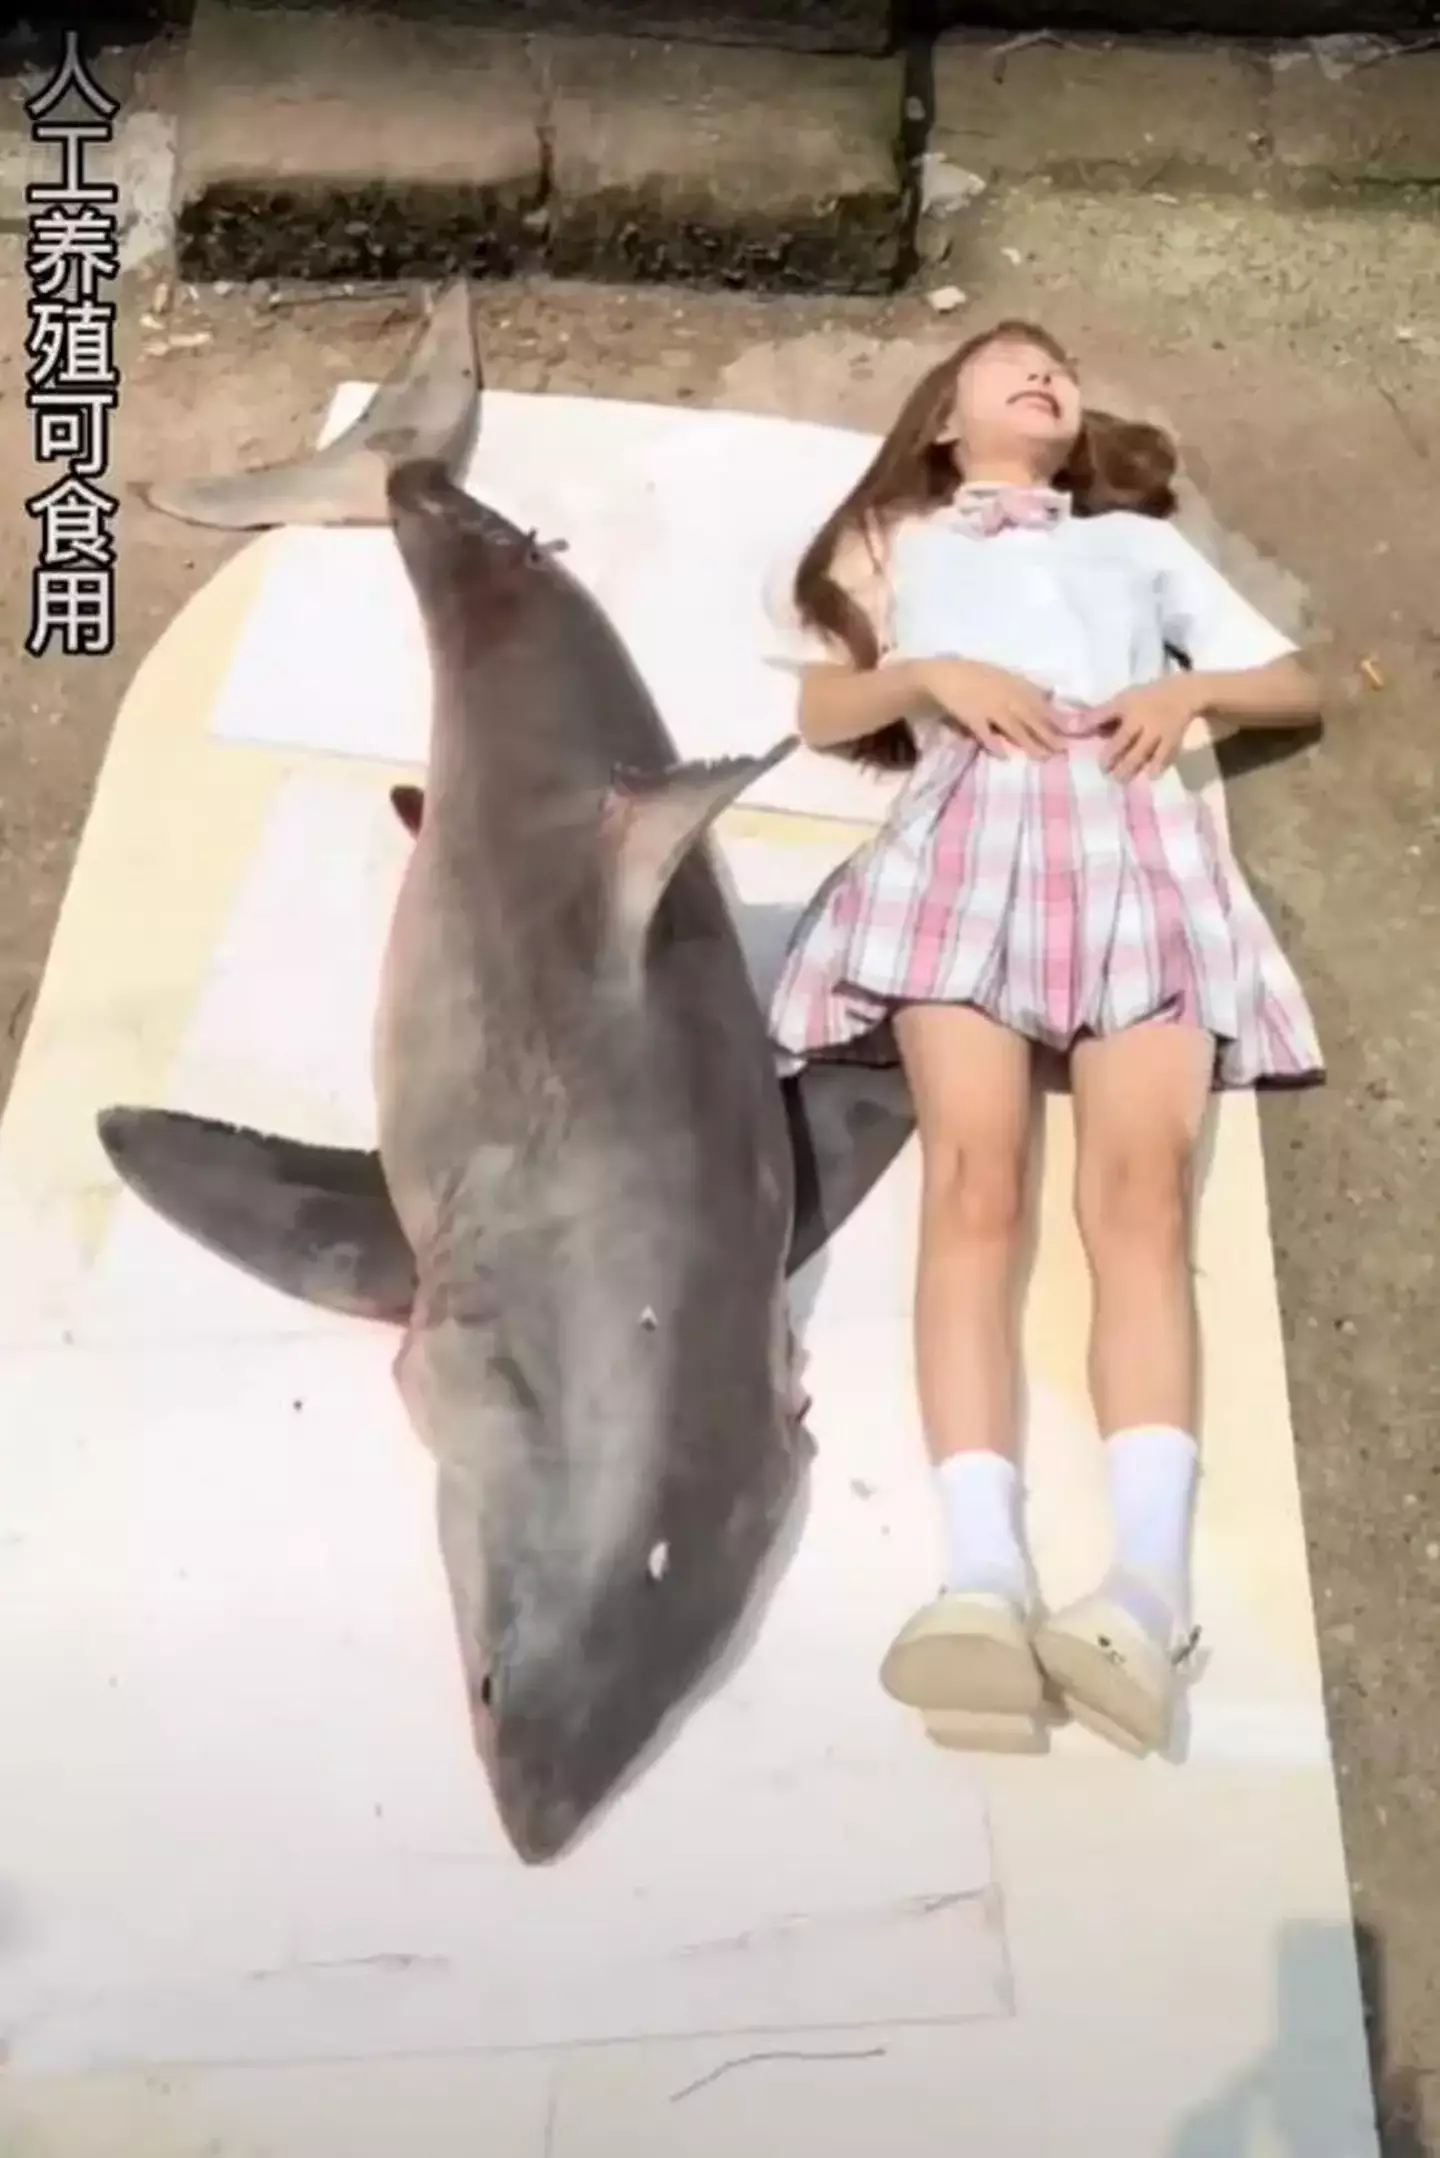 The blogger, identified only as Jin, filmed herself cooking and eating the shark.